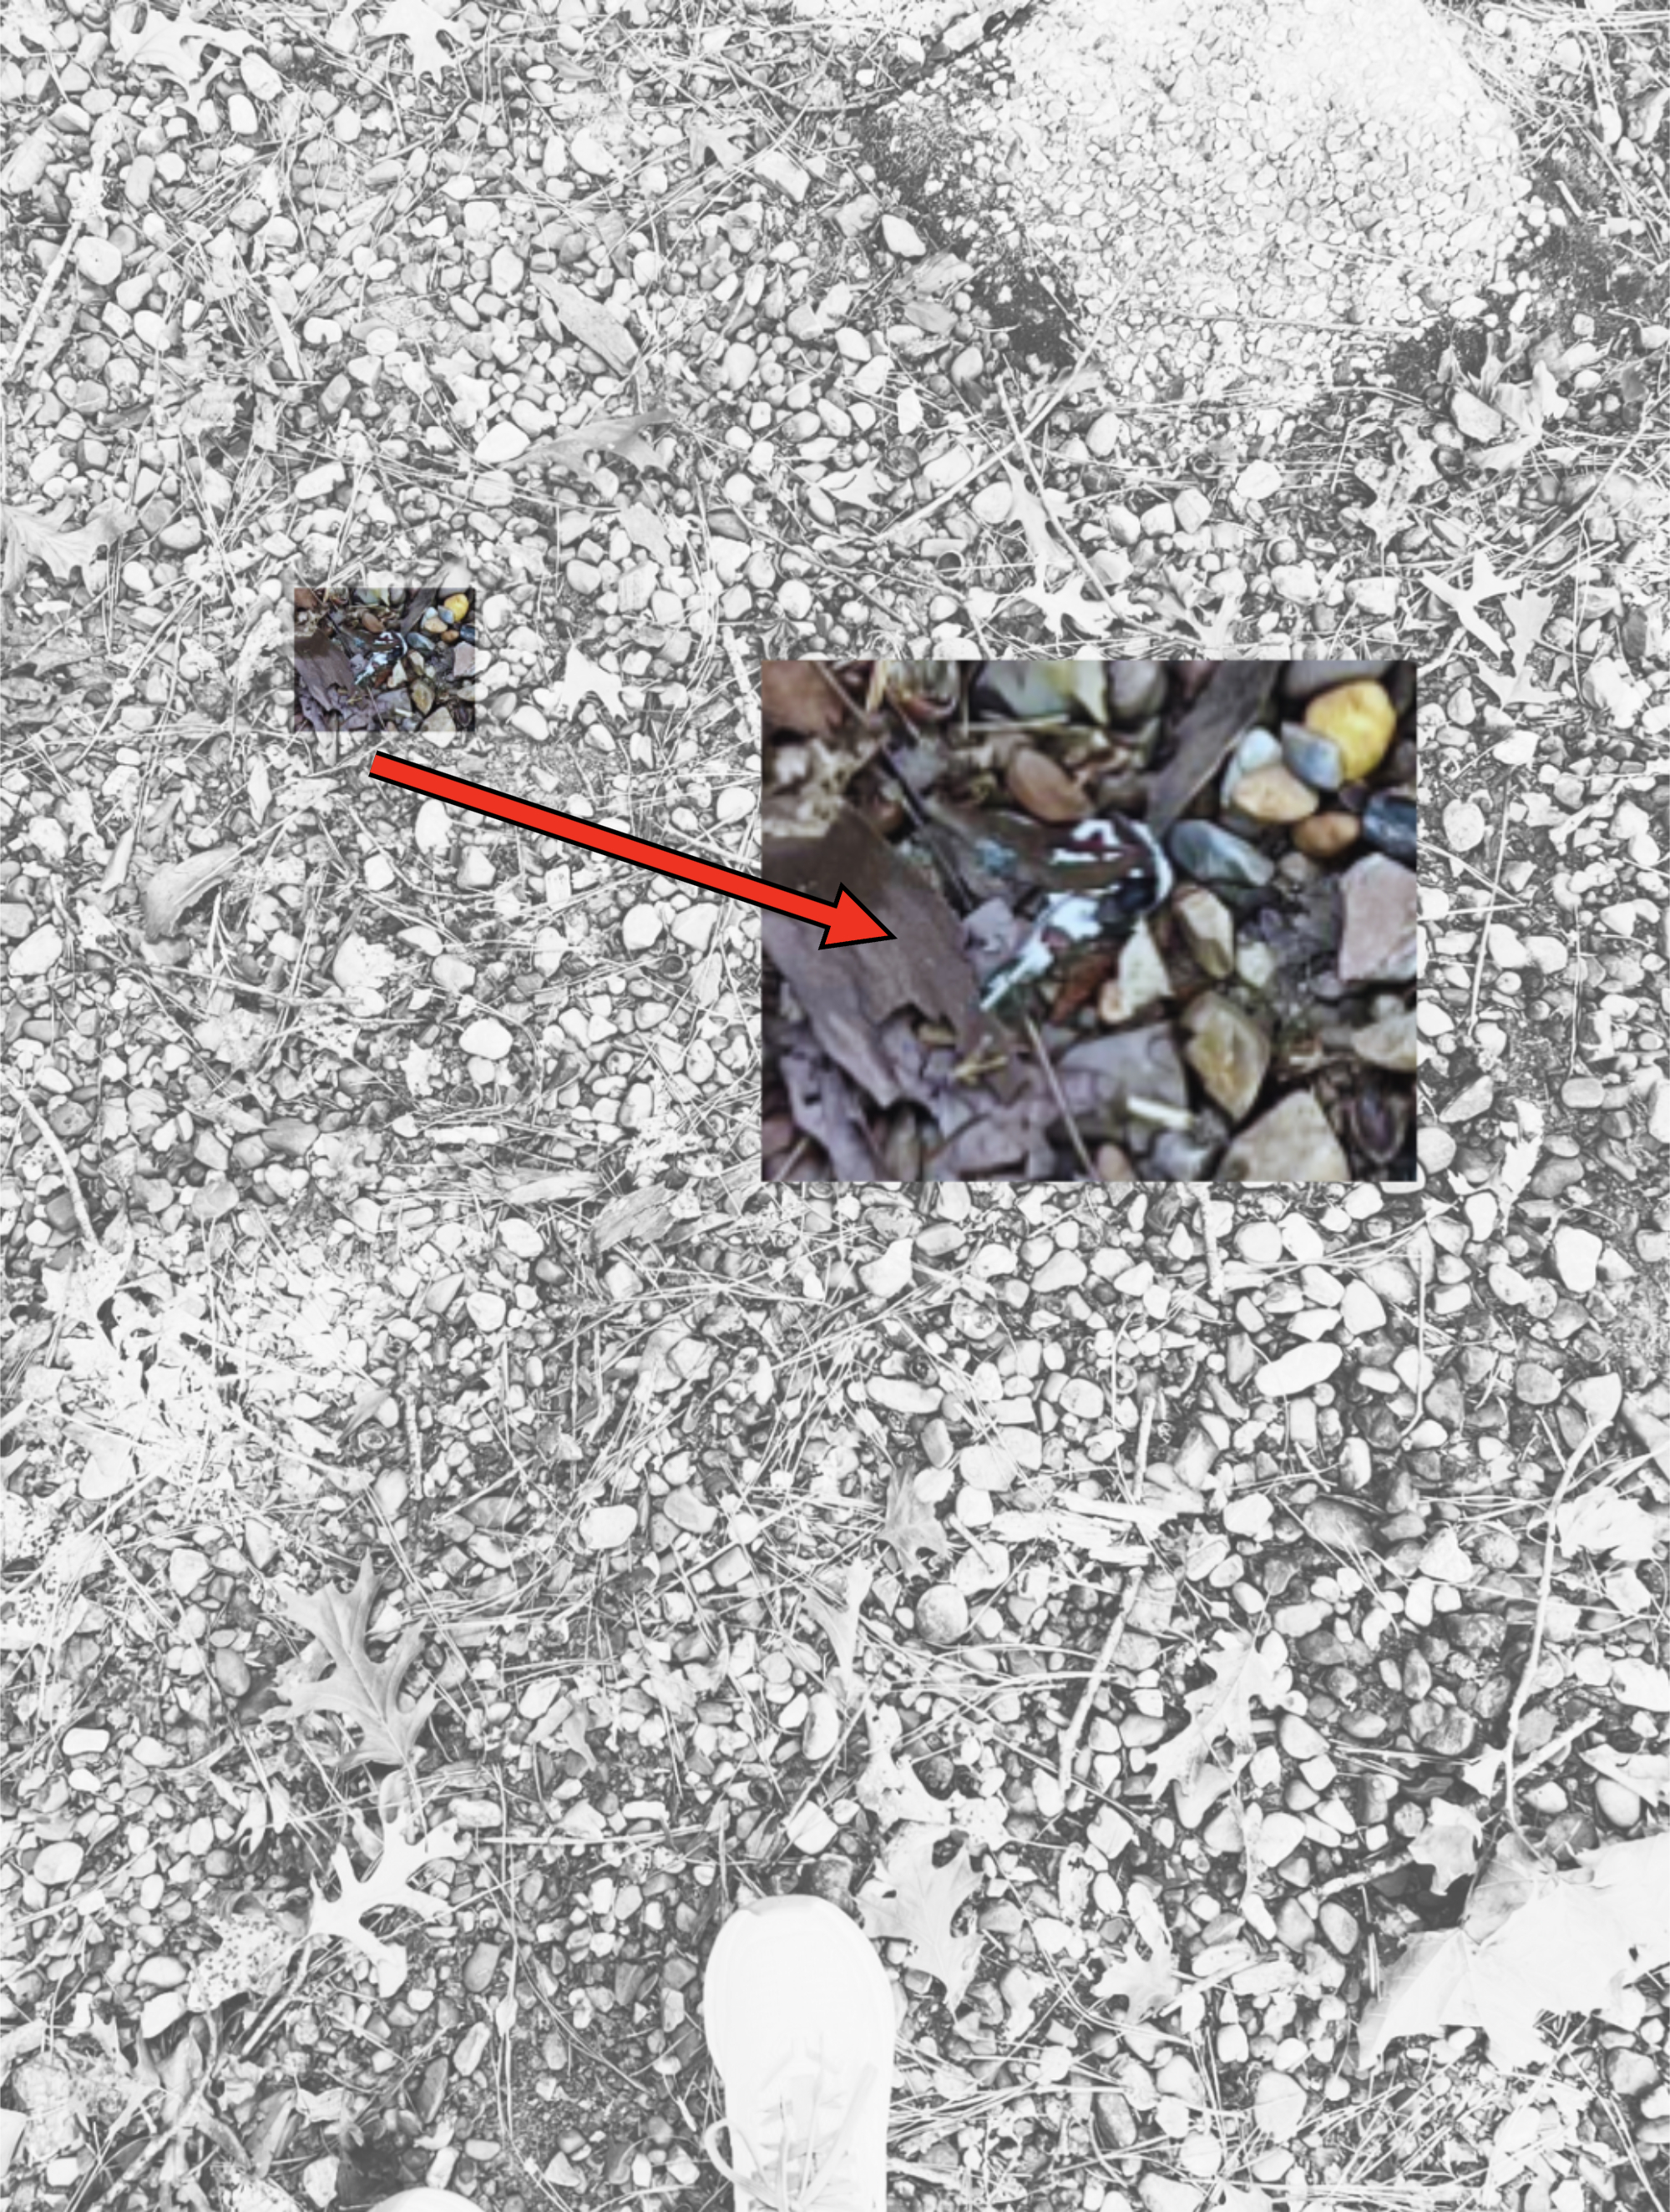 Close-up of various small rocks and leaves on the ground with part of a white shoe visible at the bottom of the image